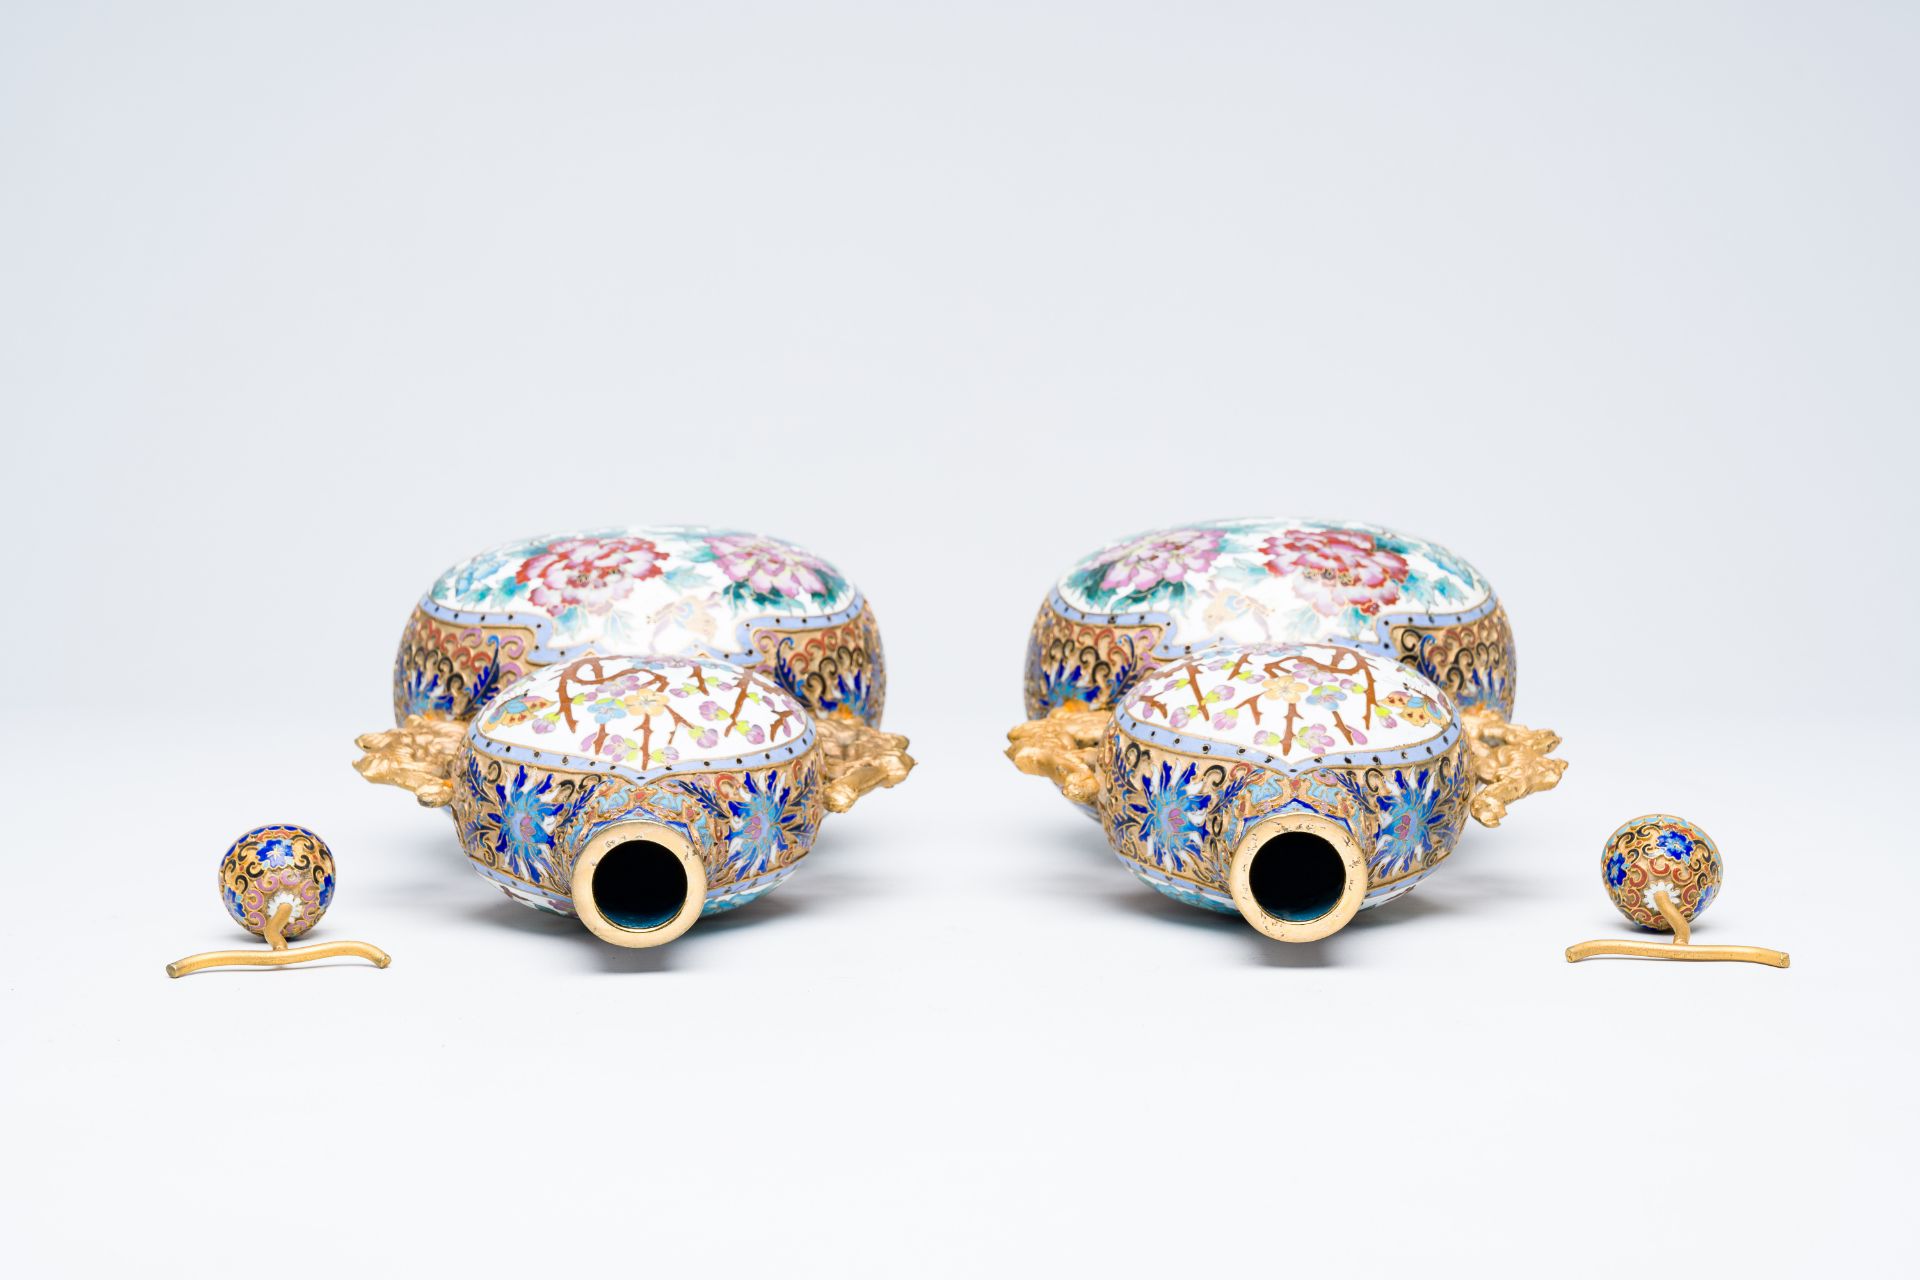 A pair of Chinese cloisonne double gourd vases on wooden stands, 20th C. - Image 6 of 9